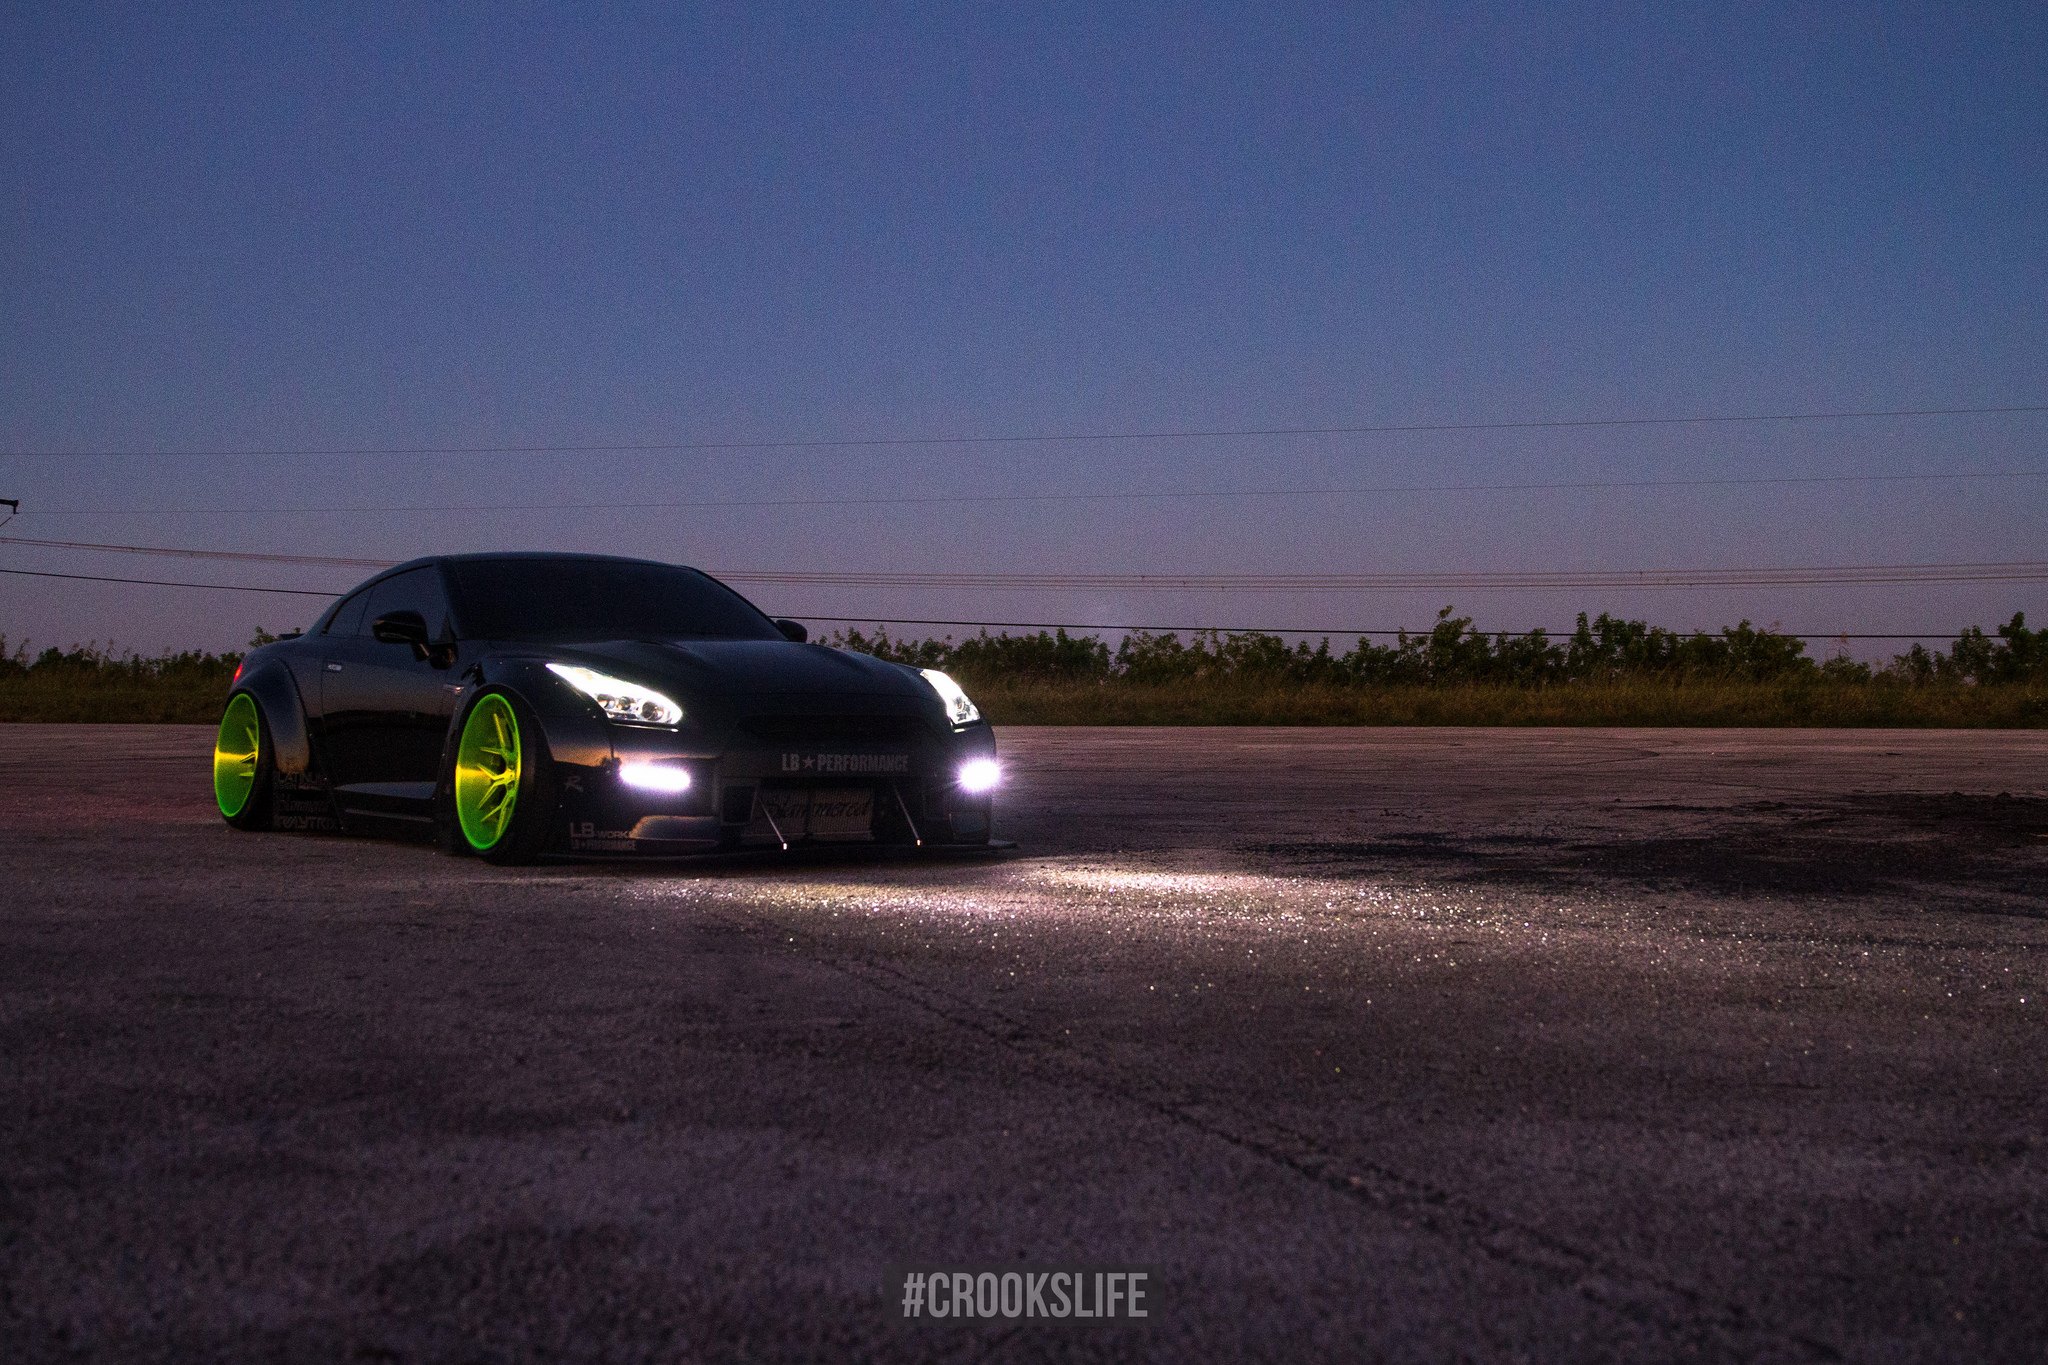 Custom LED Headlights with Halo Rings on Nissan GT-R - Photo by Jimmy Crook